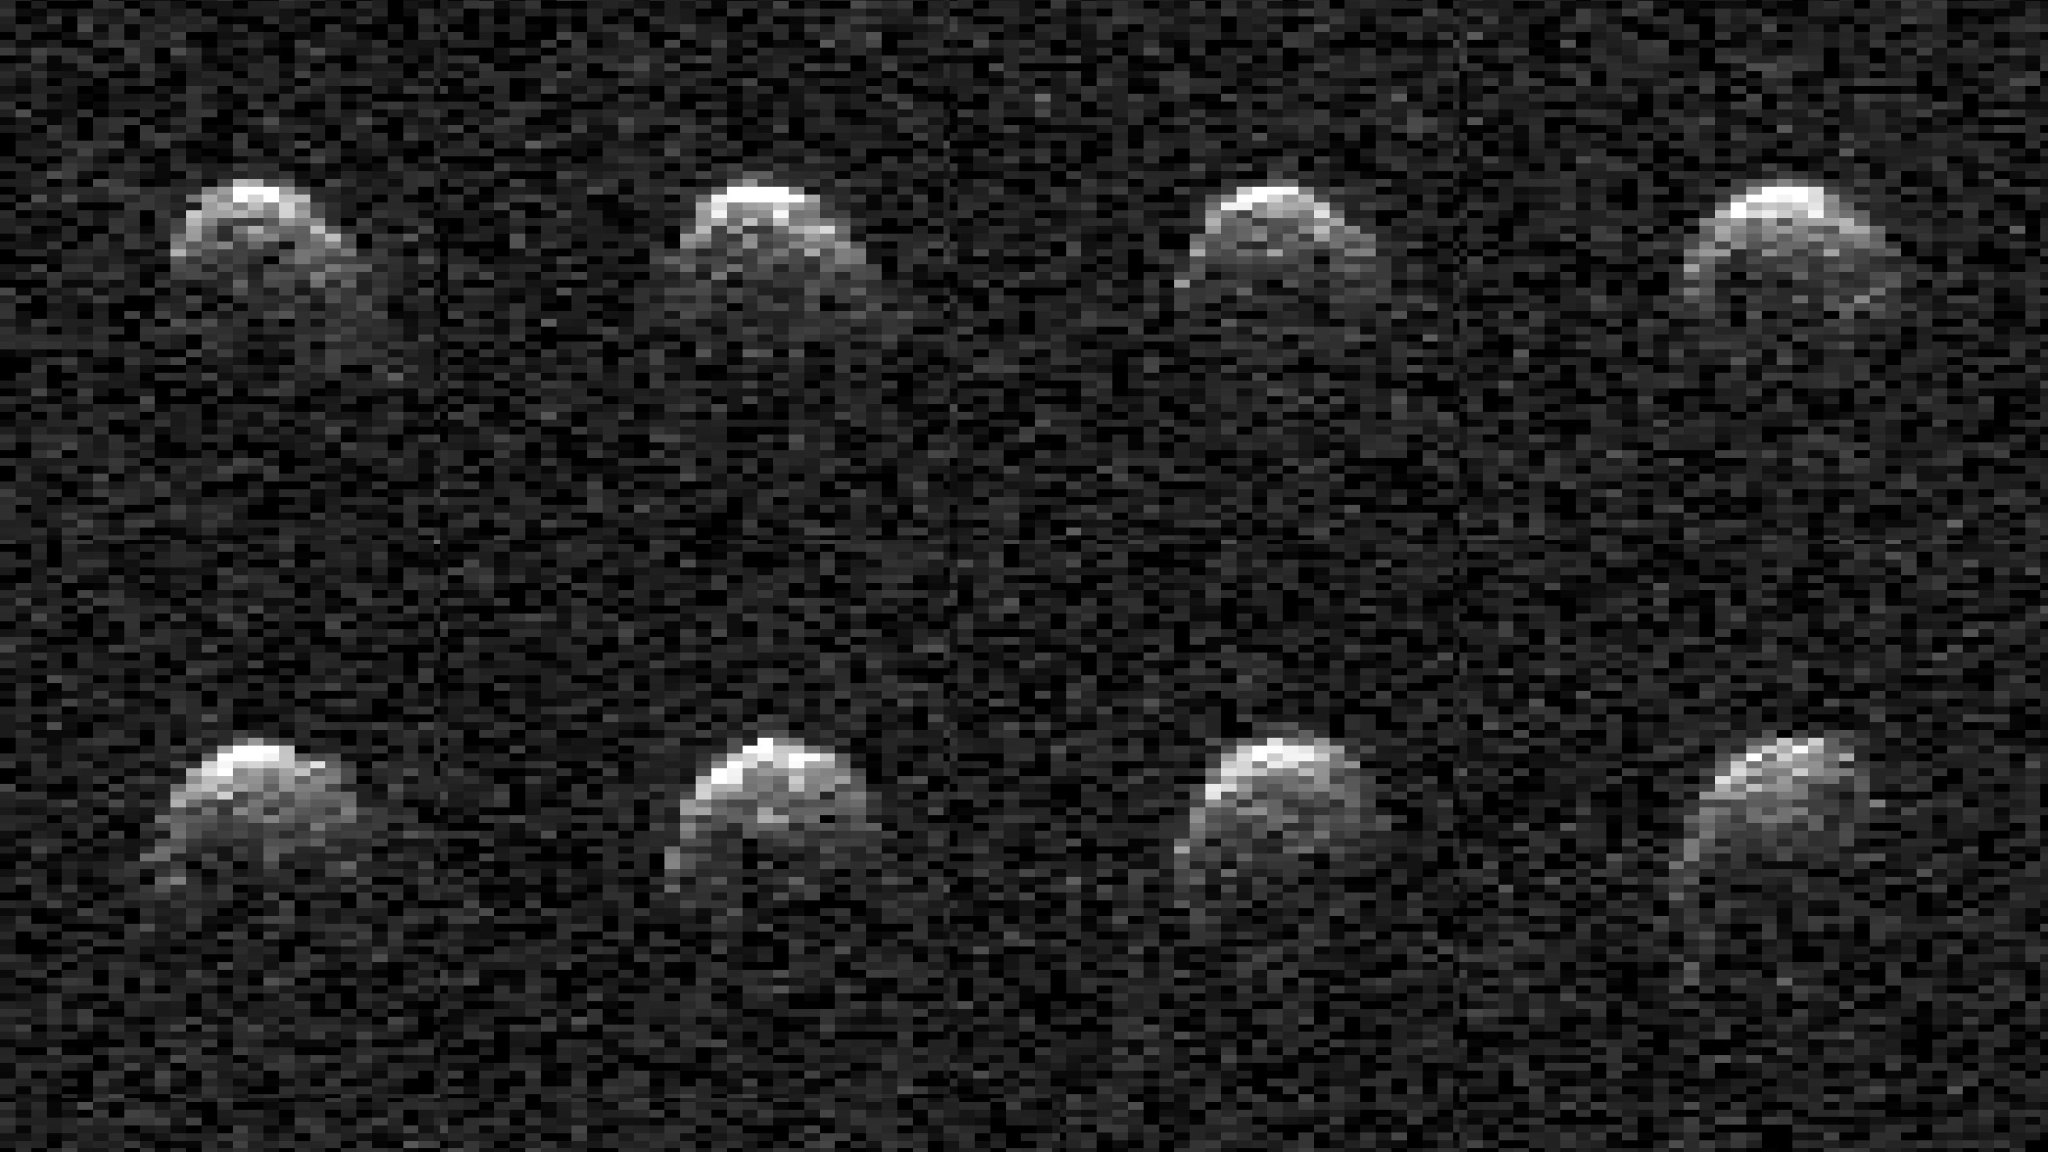 NASA’s Planetary Radar Images Slowly Spinning Asteroid